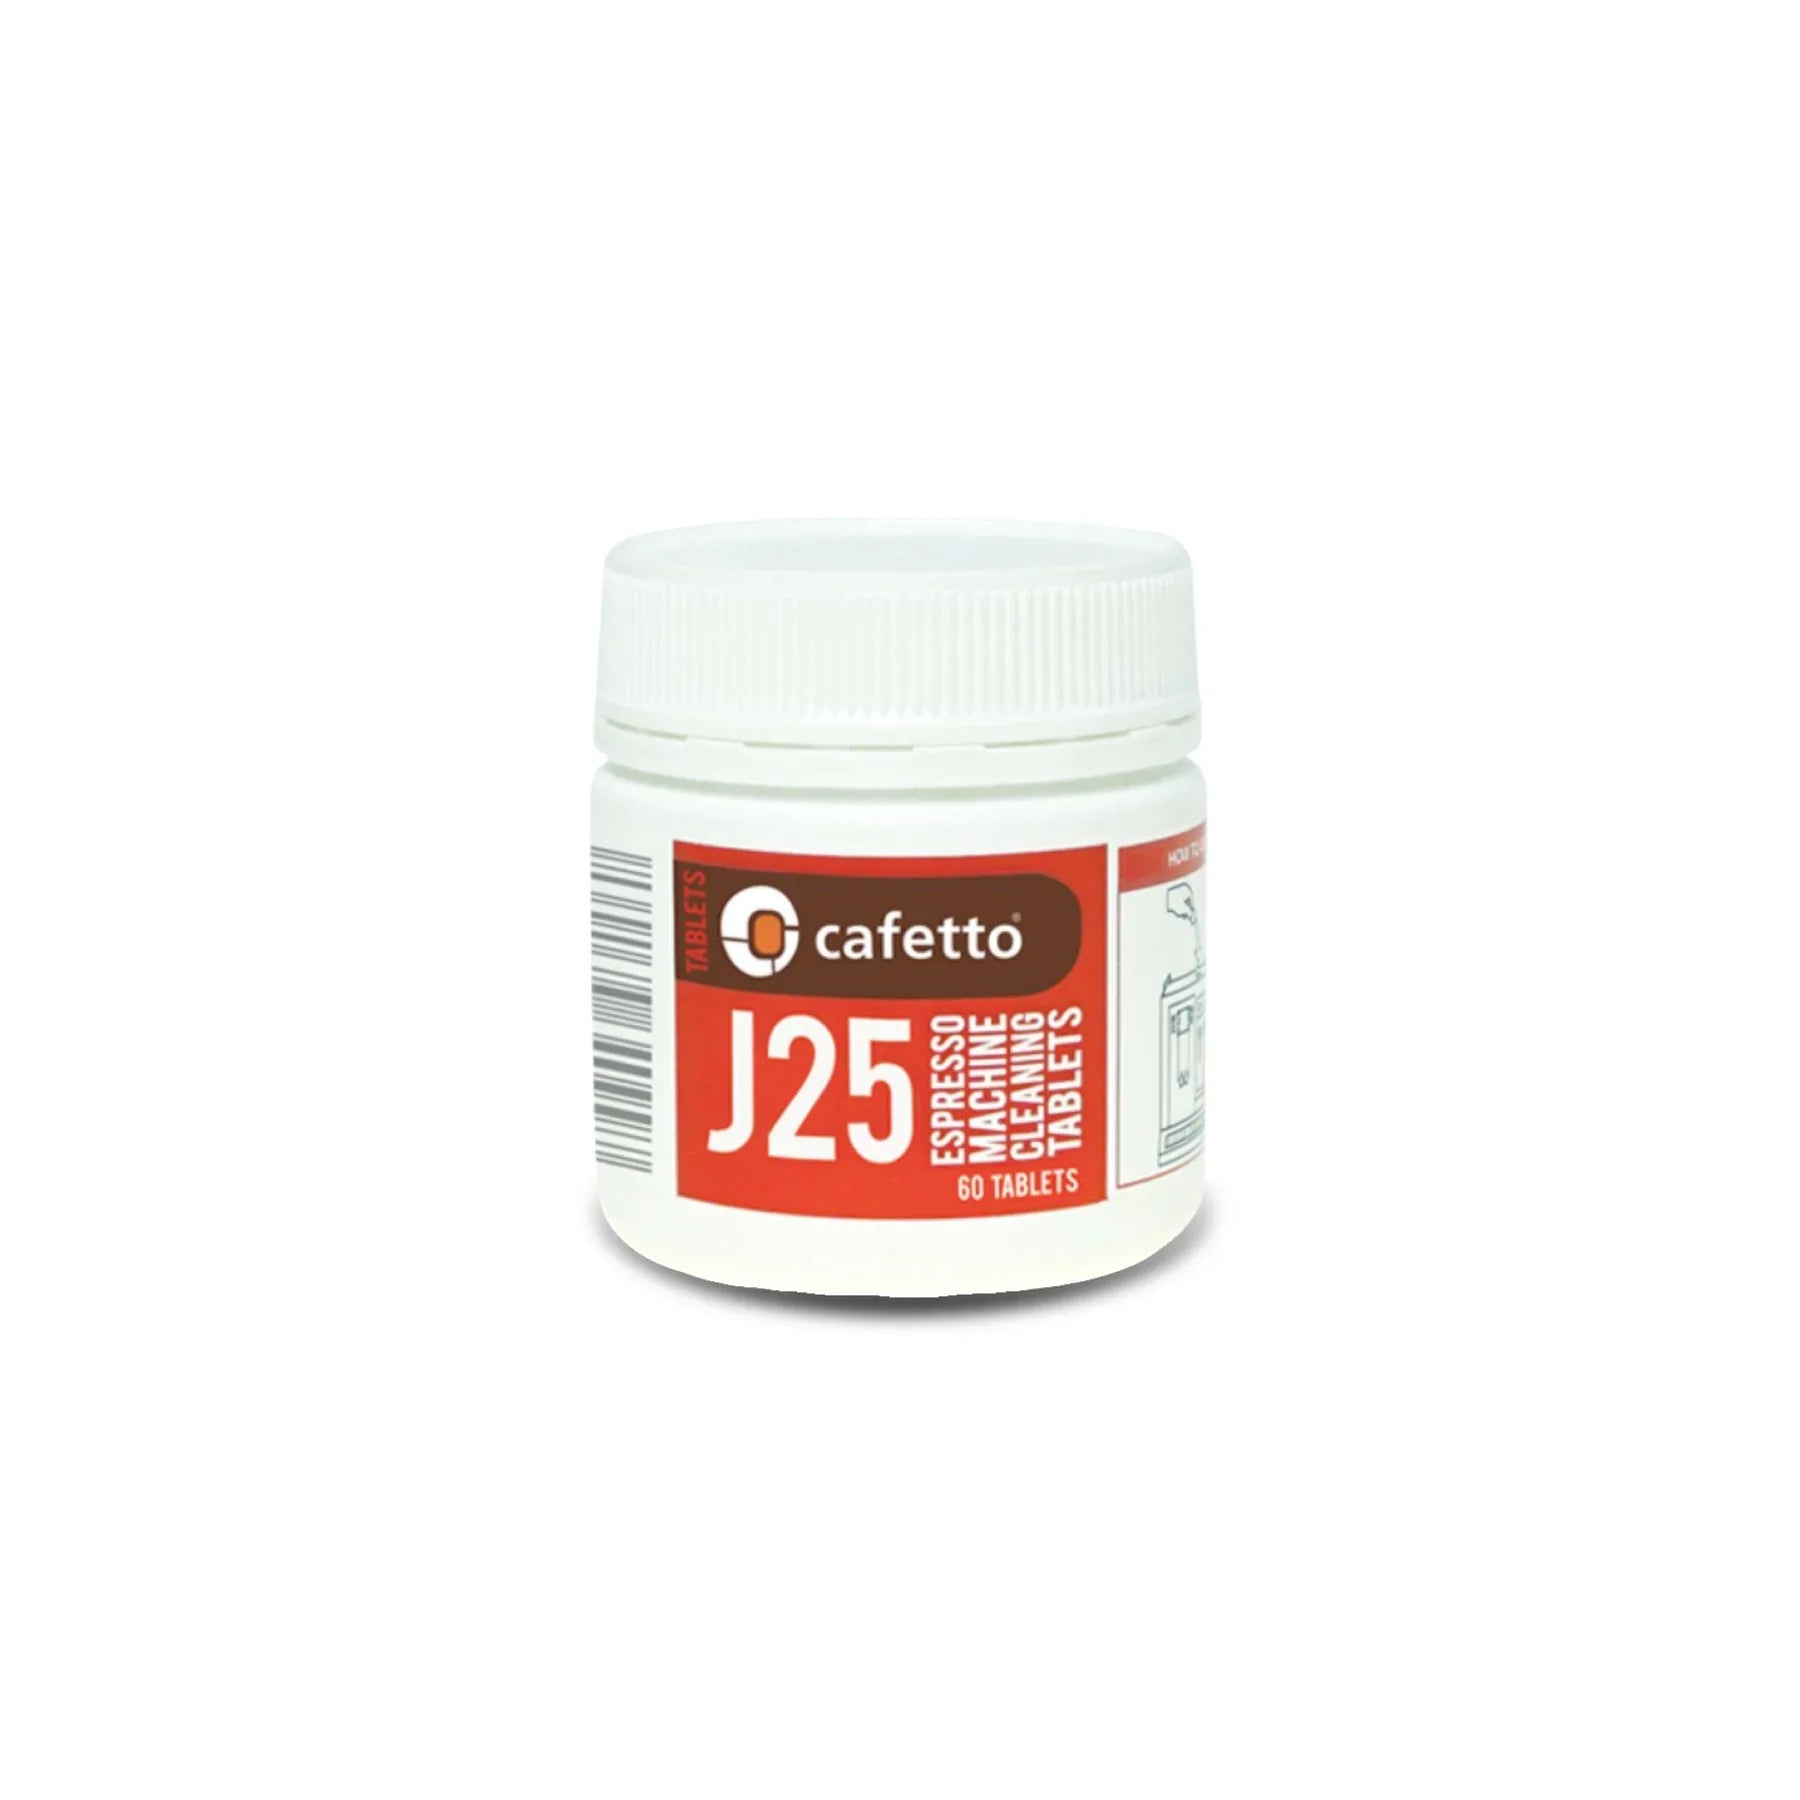 Cafetto J25 Espresso Machine Cleaning Tablets 60 Tablets